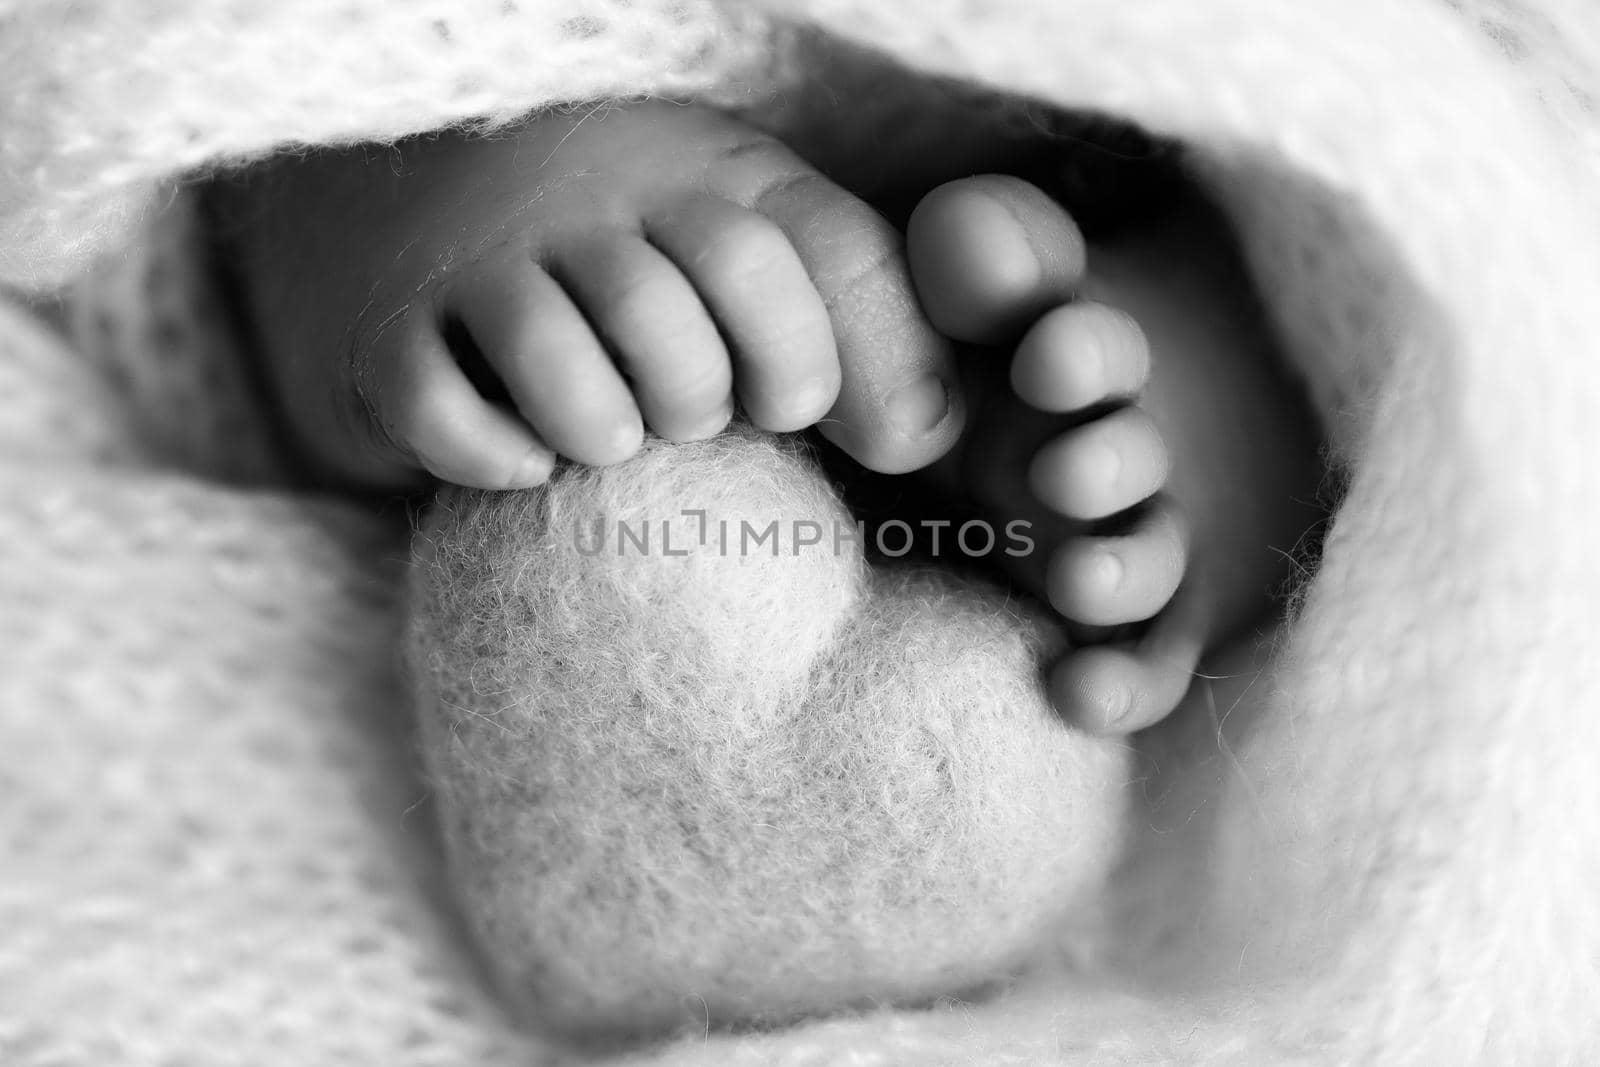 Feet of a newborn with a woolen heart, wrapped in a soft blanket. Black and white studio photography. High quality photo